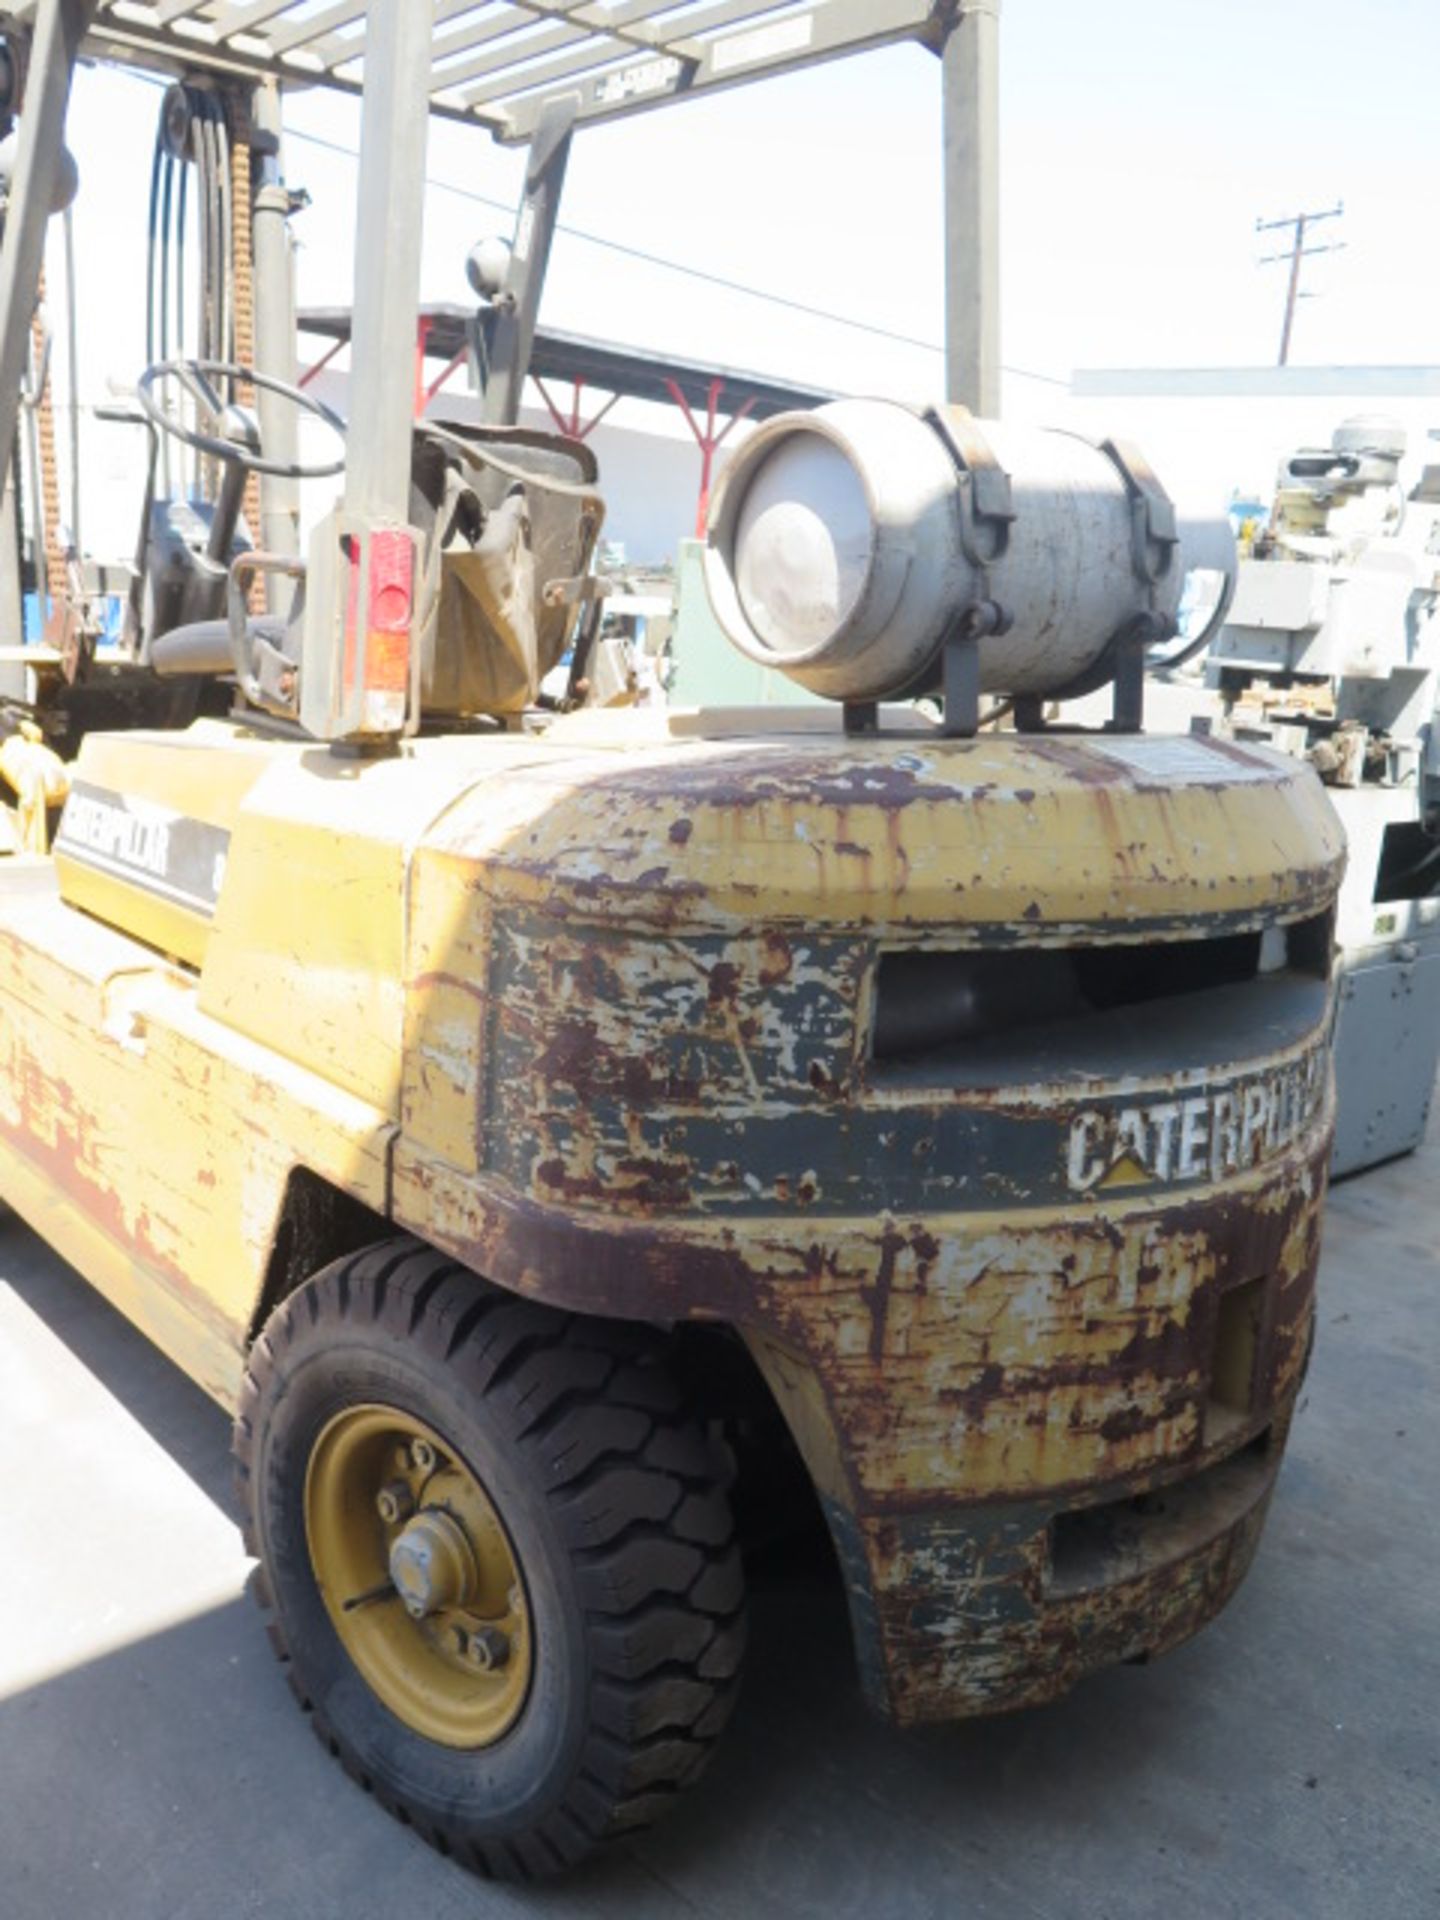 Caterpillar 80 8000 Lb Cap LPG Forklift w/ 2-Stage Mast, Side Shift, Pneumatic Yard Tires - Image 5 of 9